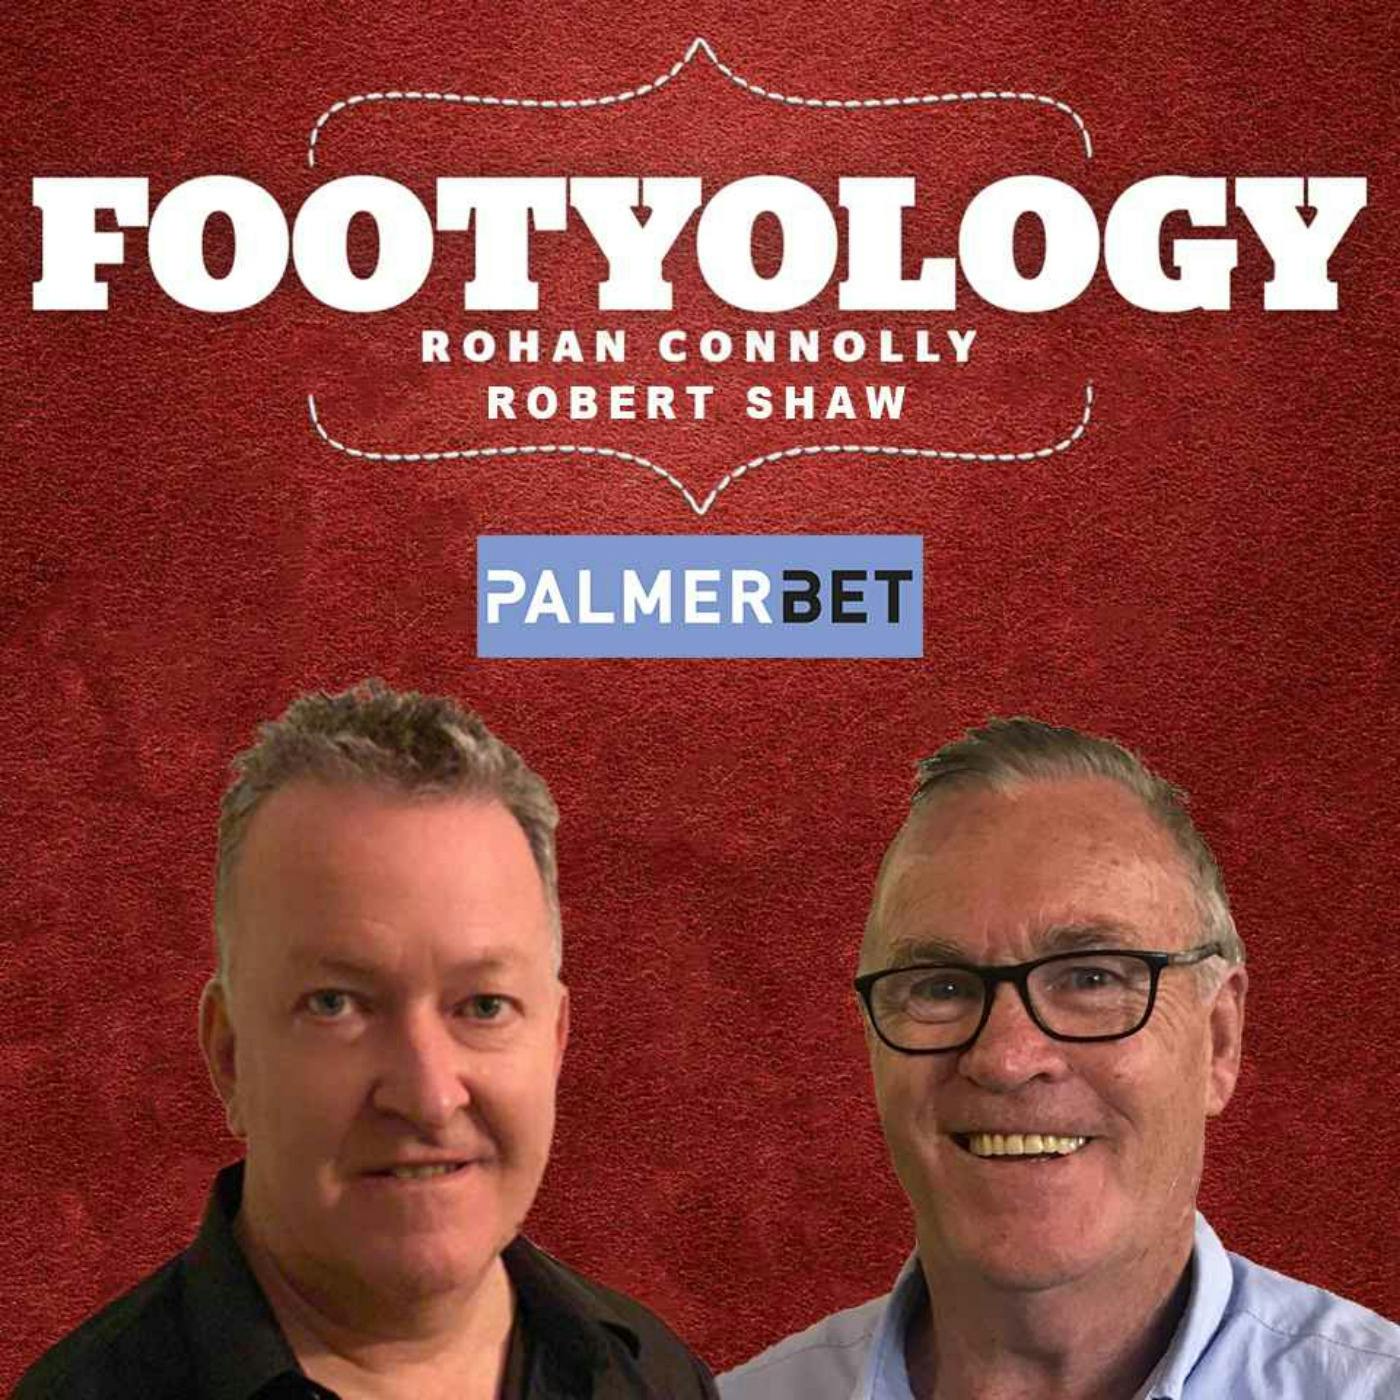 Footyology Podcast - July 17th 2022